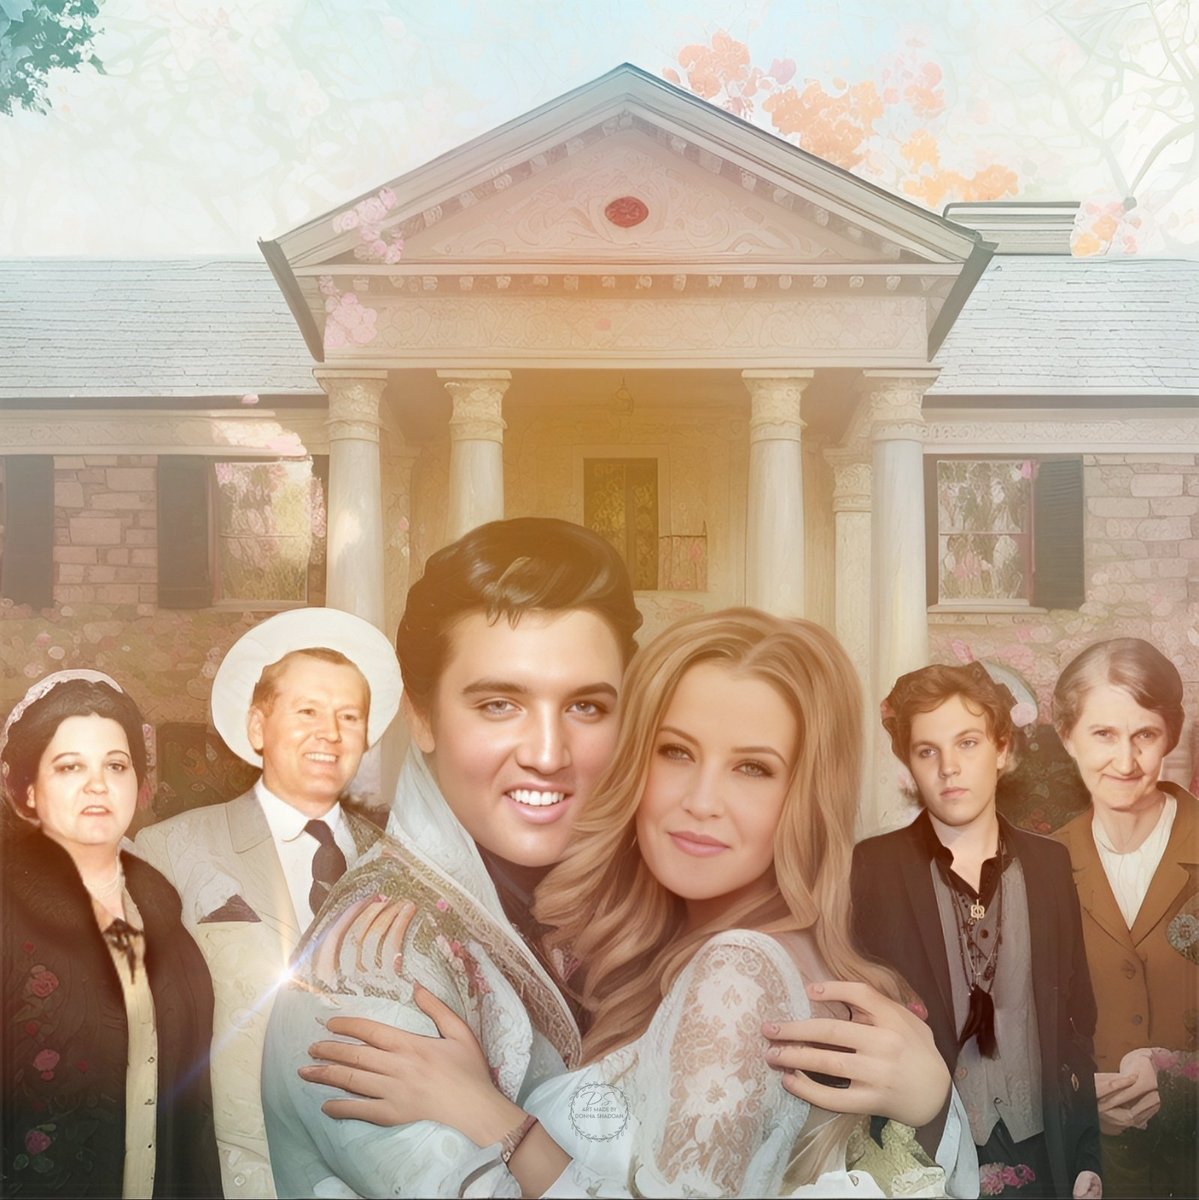 Something I made for Elvis and his family with help of AI. The sunblast represents Elvis' twin Jesse. They are missed.  #elvispresleyfan #elvisforever #elvis #elvispresley #lisamarie #LisaMariePresley #benjaminkeough #minniemae #vernonpresley #gladyspresley #graceland #rip